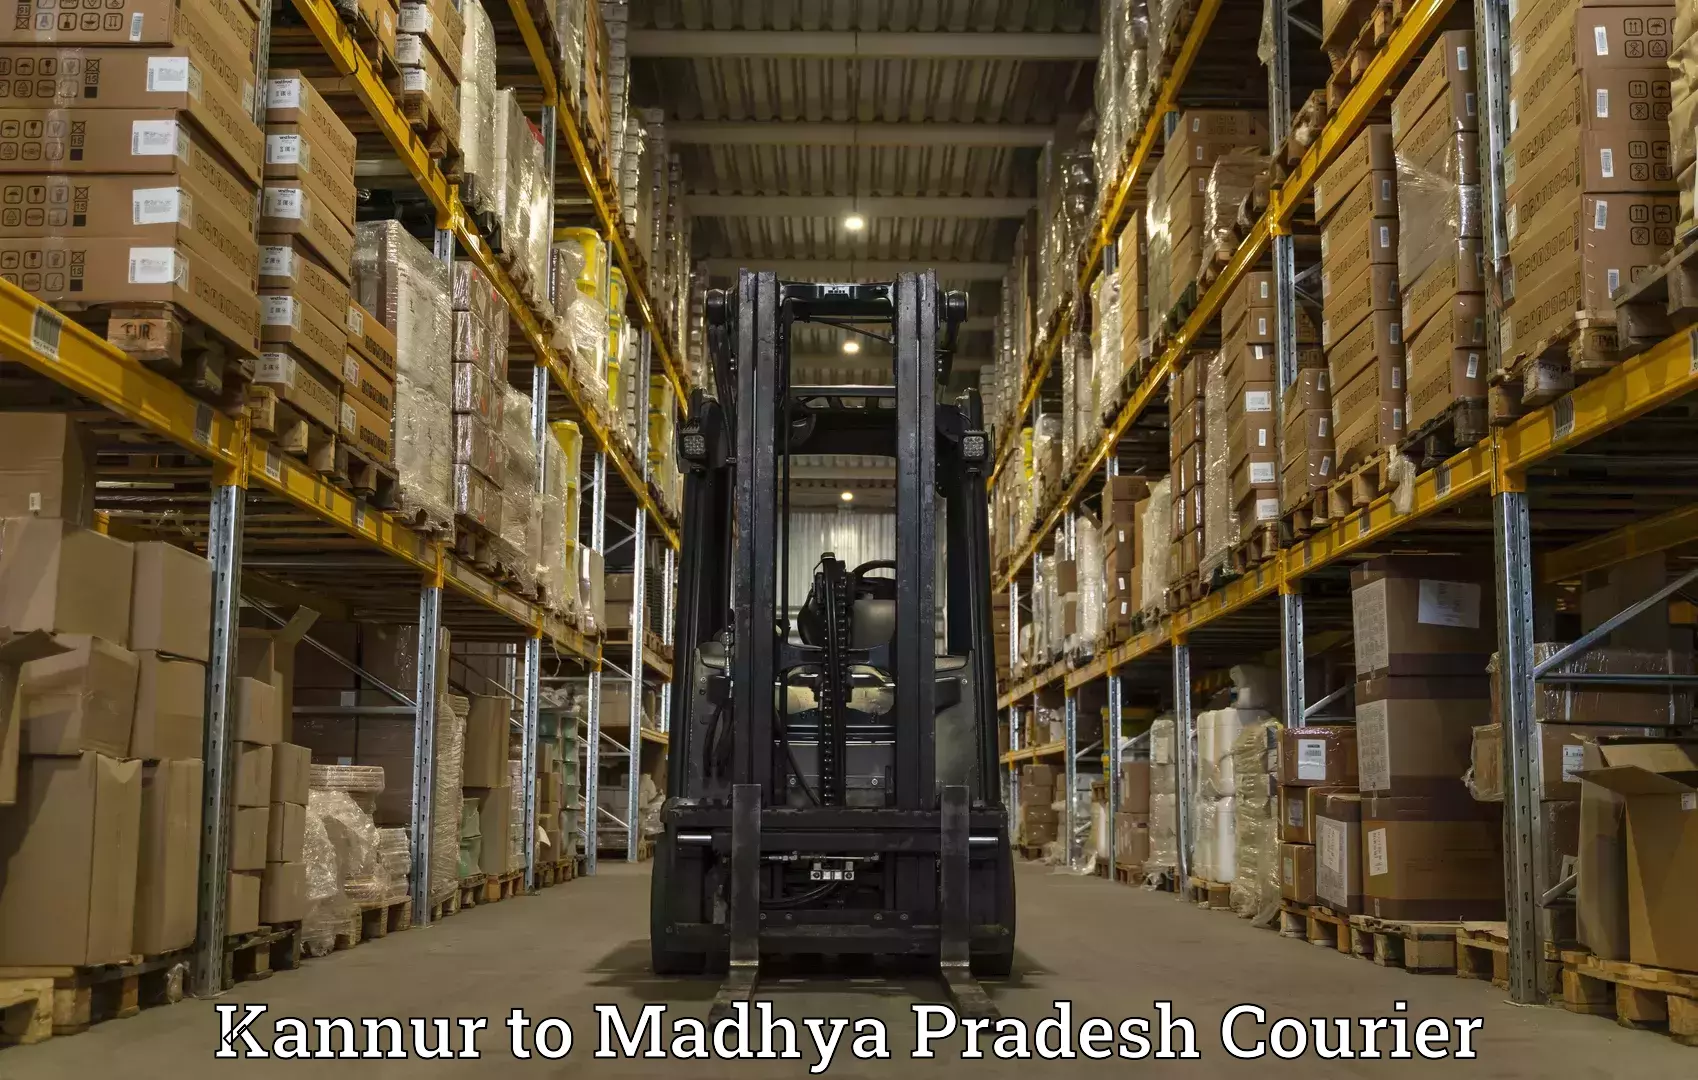 Global freight services Kannur to Madwas